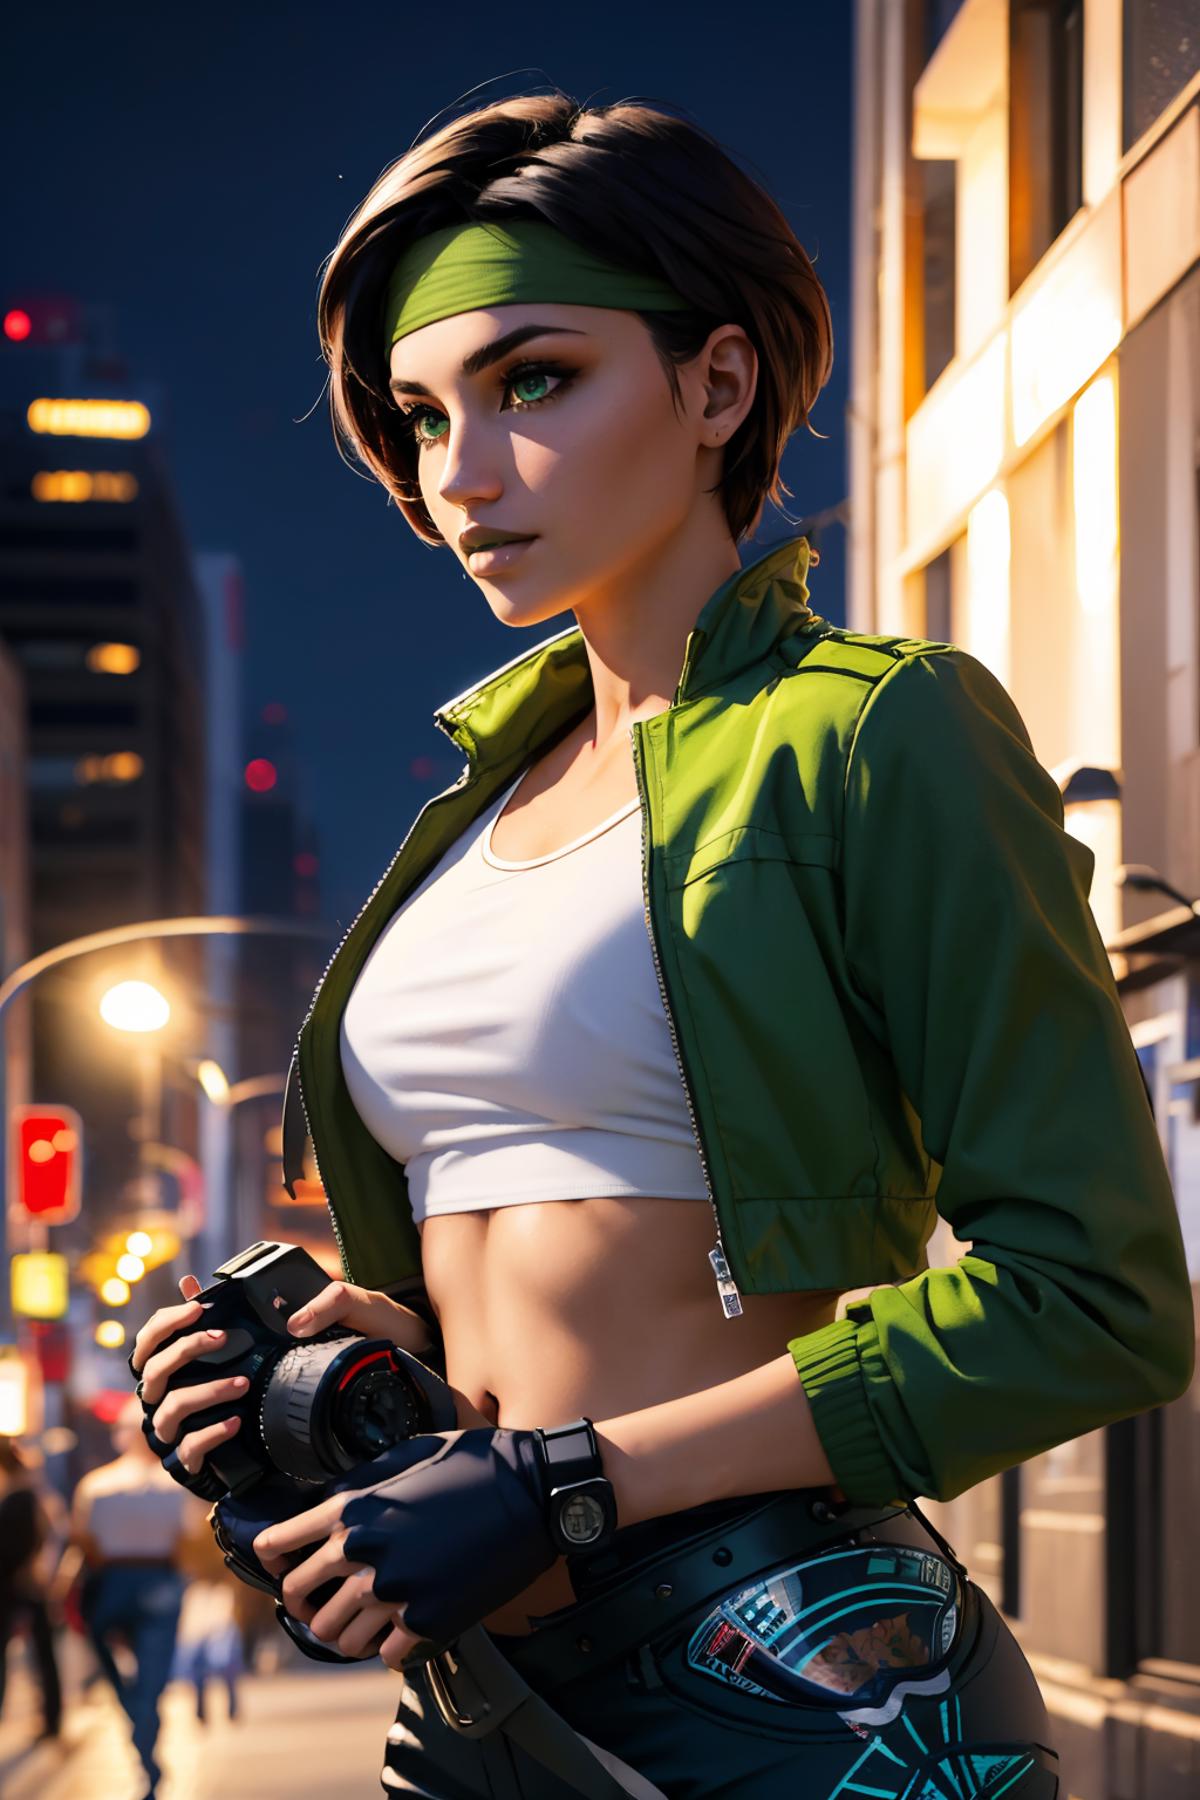 Jade - Beyond good and evil image by zetsubousensei